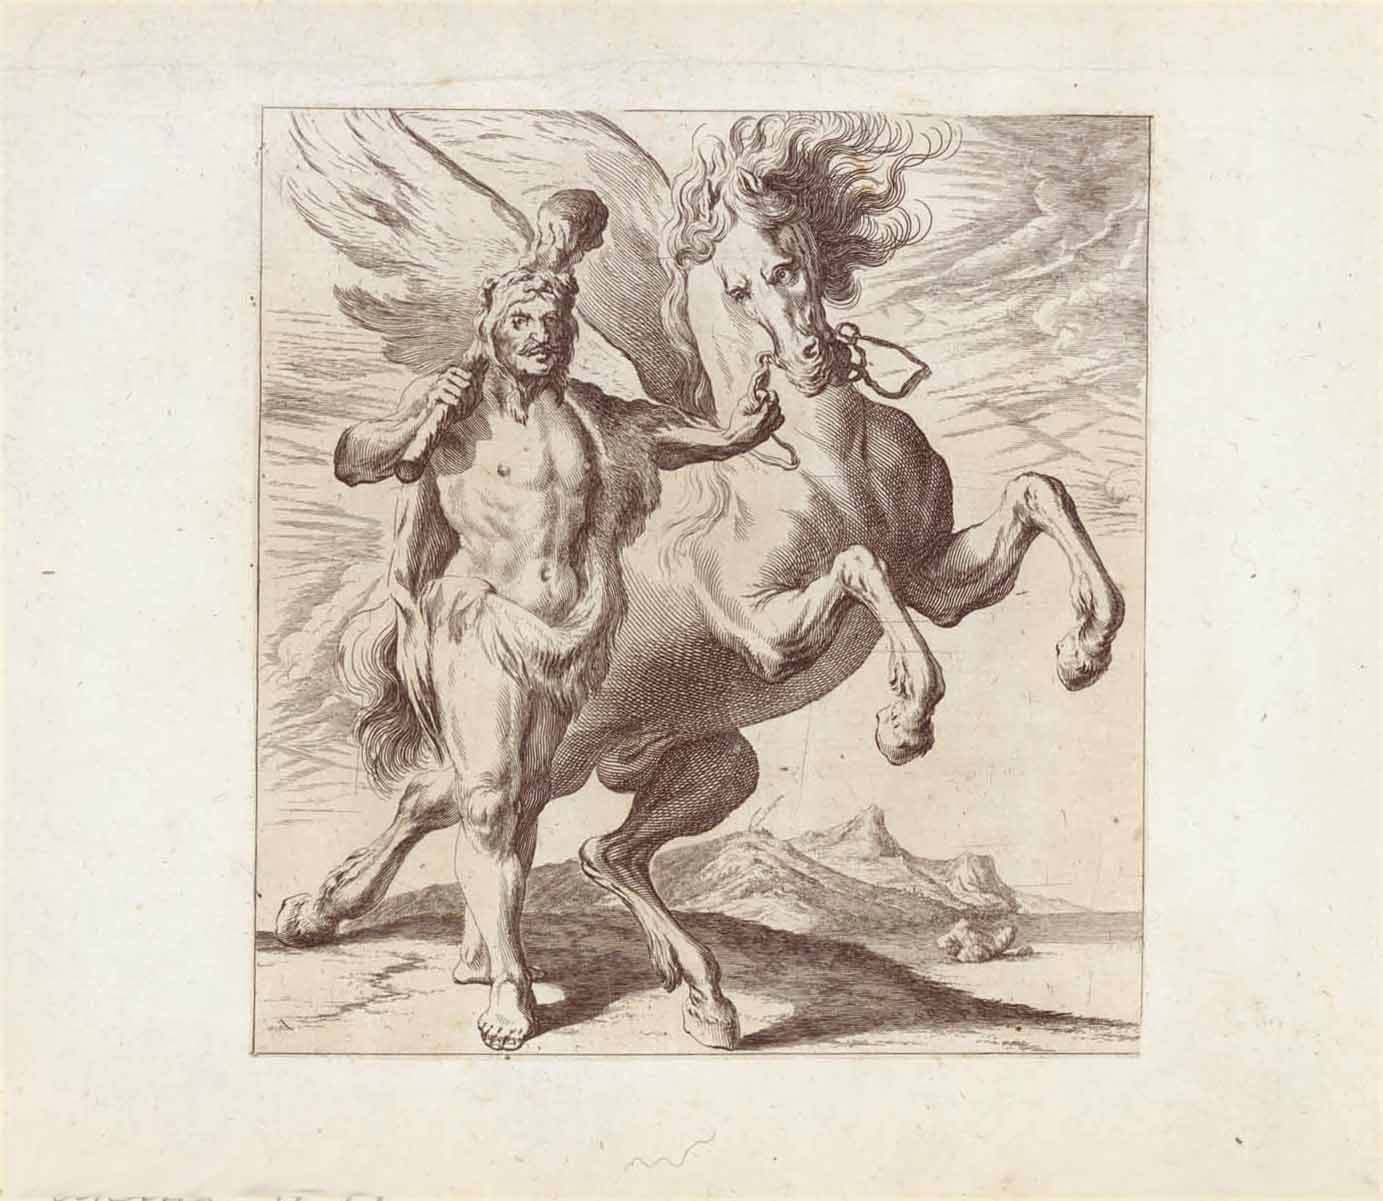 No title. - Winged stallion led by a Celtic type, fur clad man with a club over his shoulder.  Herkules?  Copper etching by Melchior Kuesel (1626-1684)  Augsburg, 1671  Original antique print , Hercules?